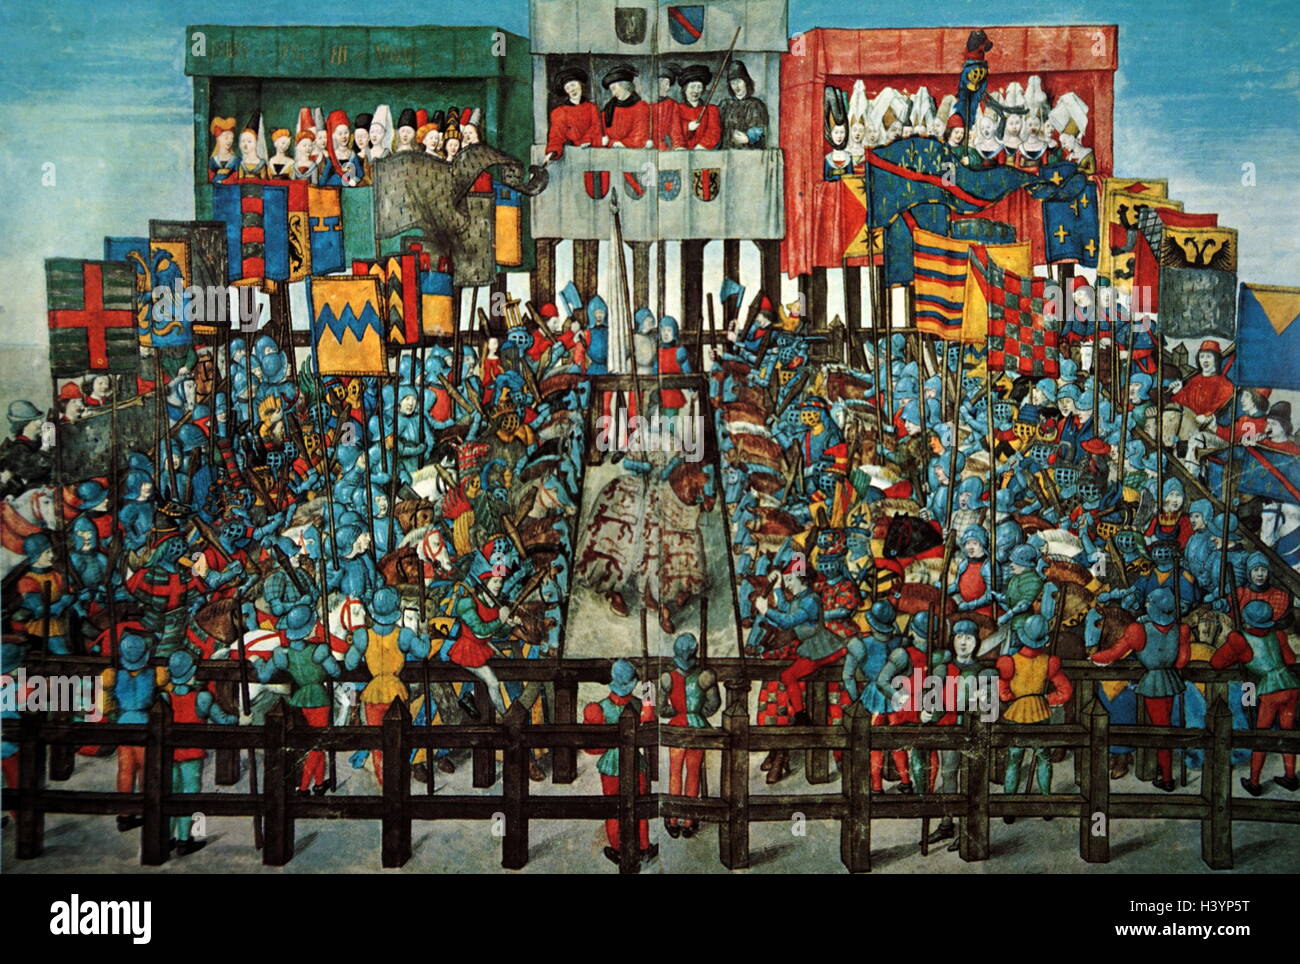 Illumination depicting a medieval tournament. The knights hold colourful banners and face each other preparing to confront each other. Dated 15th Century Stock Photo